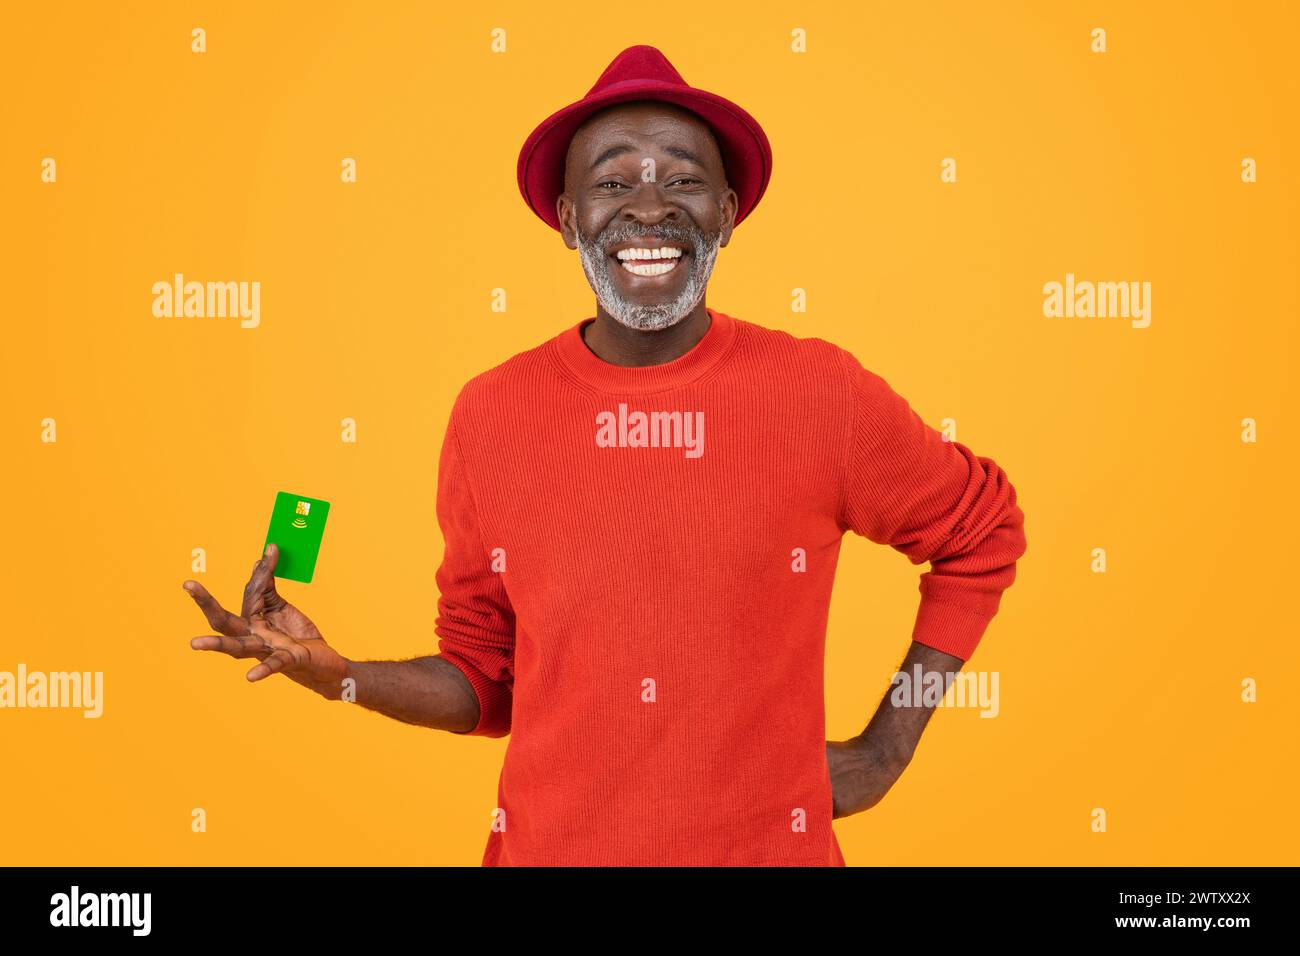 A cheerful senior black man with a bright white smile, wearing a red hat and sweater Stock Photo